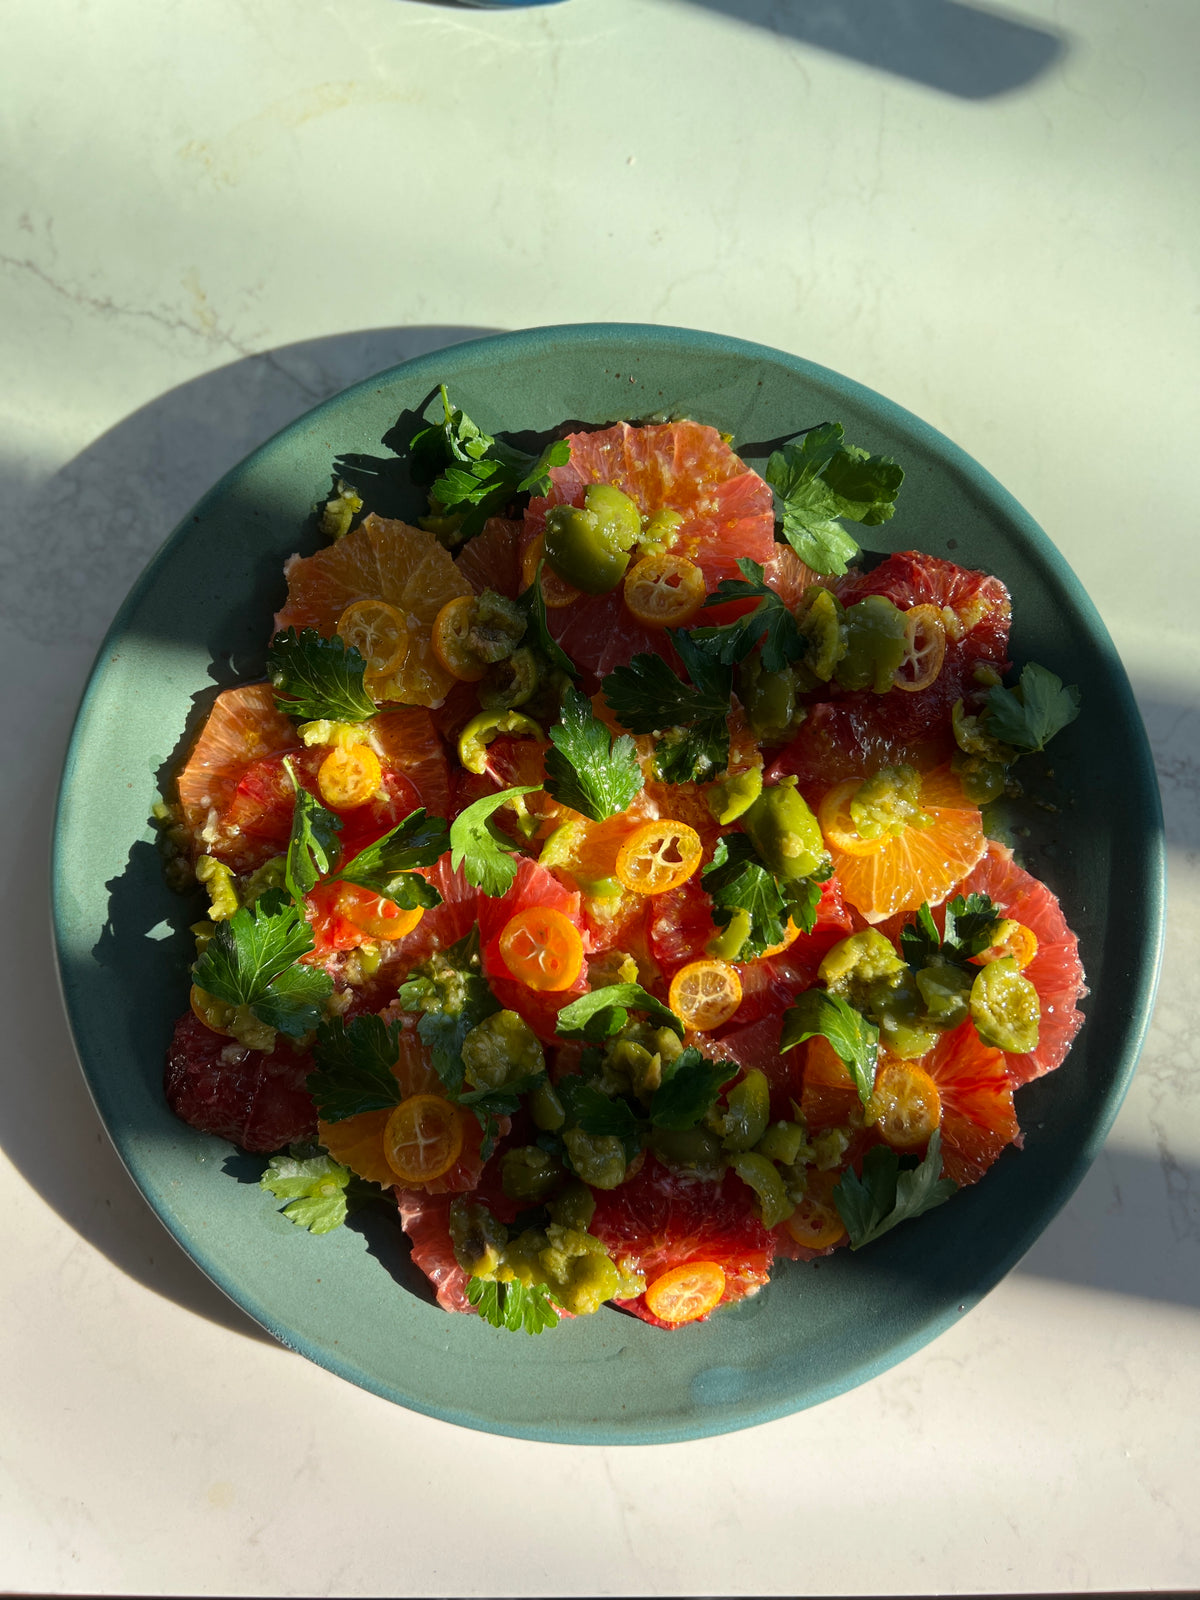 Winter Citrus Salad with 'Olio Nuovo,' Meyer Lemon, and Green Olive Dressing